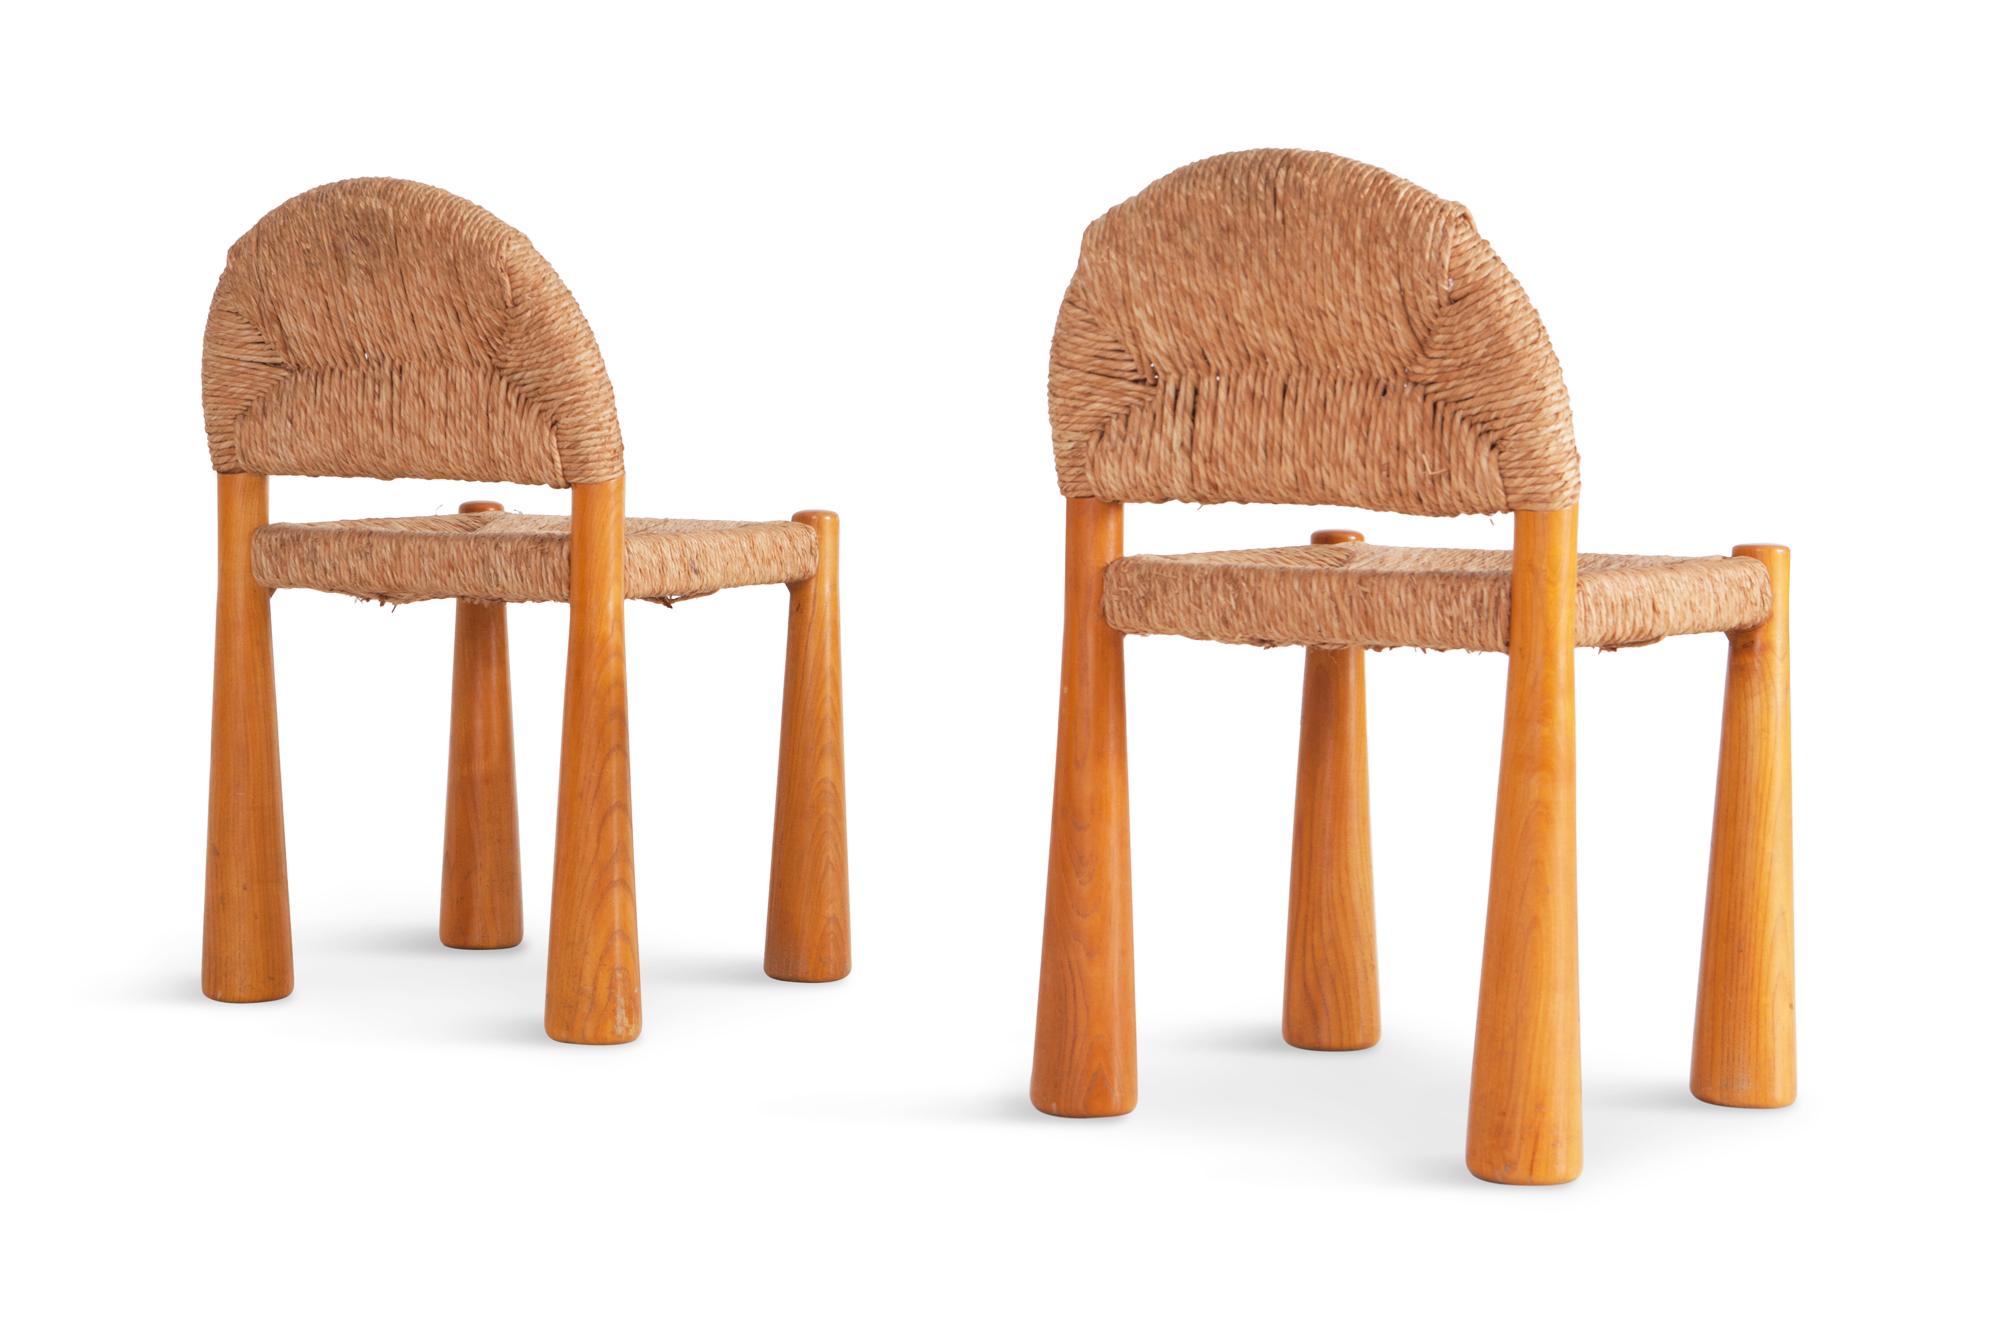 Italian Wicker and Solid Pine Toscanolla Chairs by Alessandro Becchi for Giovanetti 1970